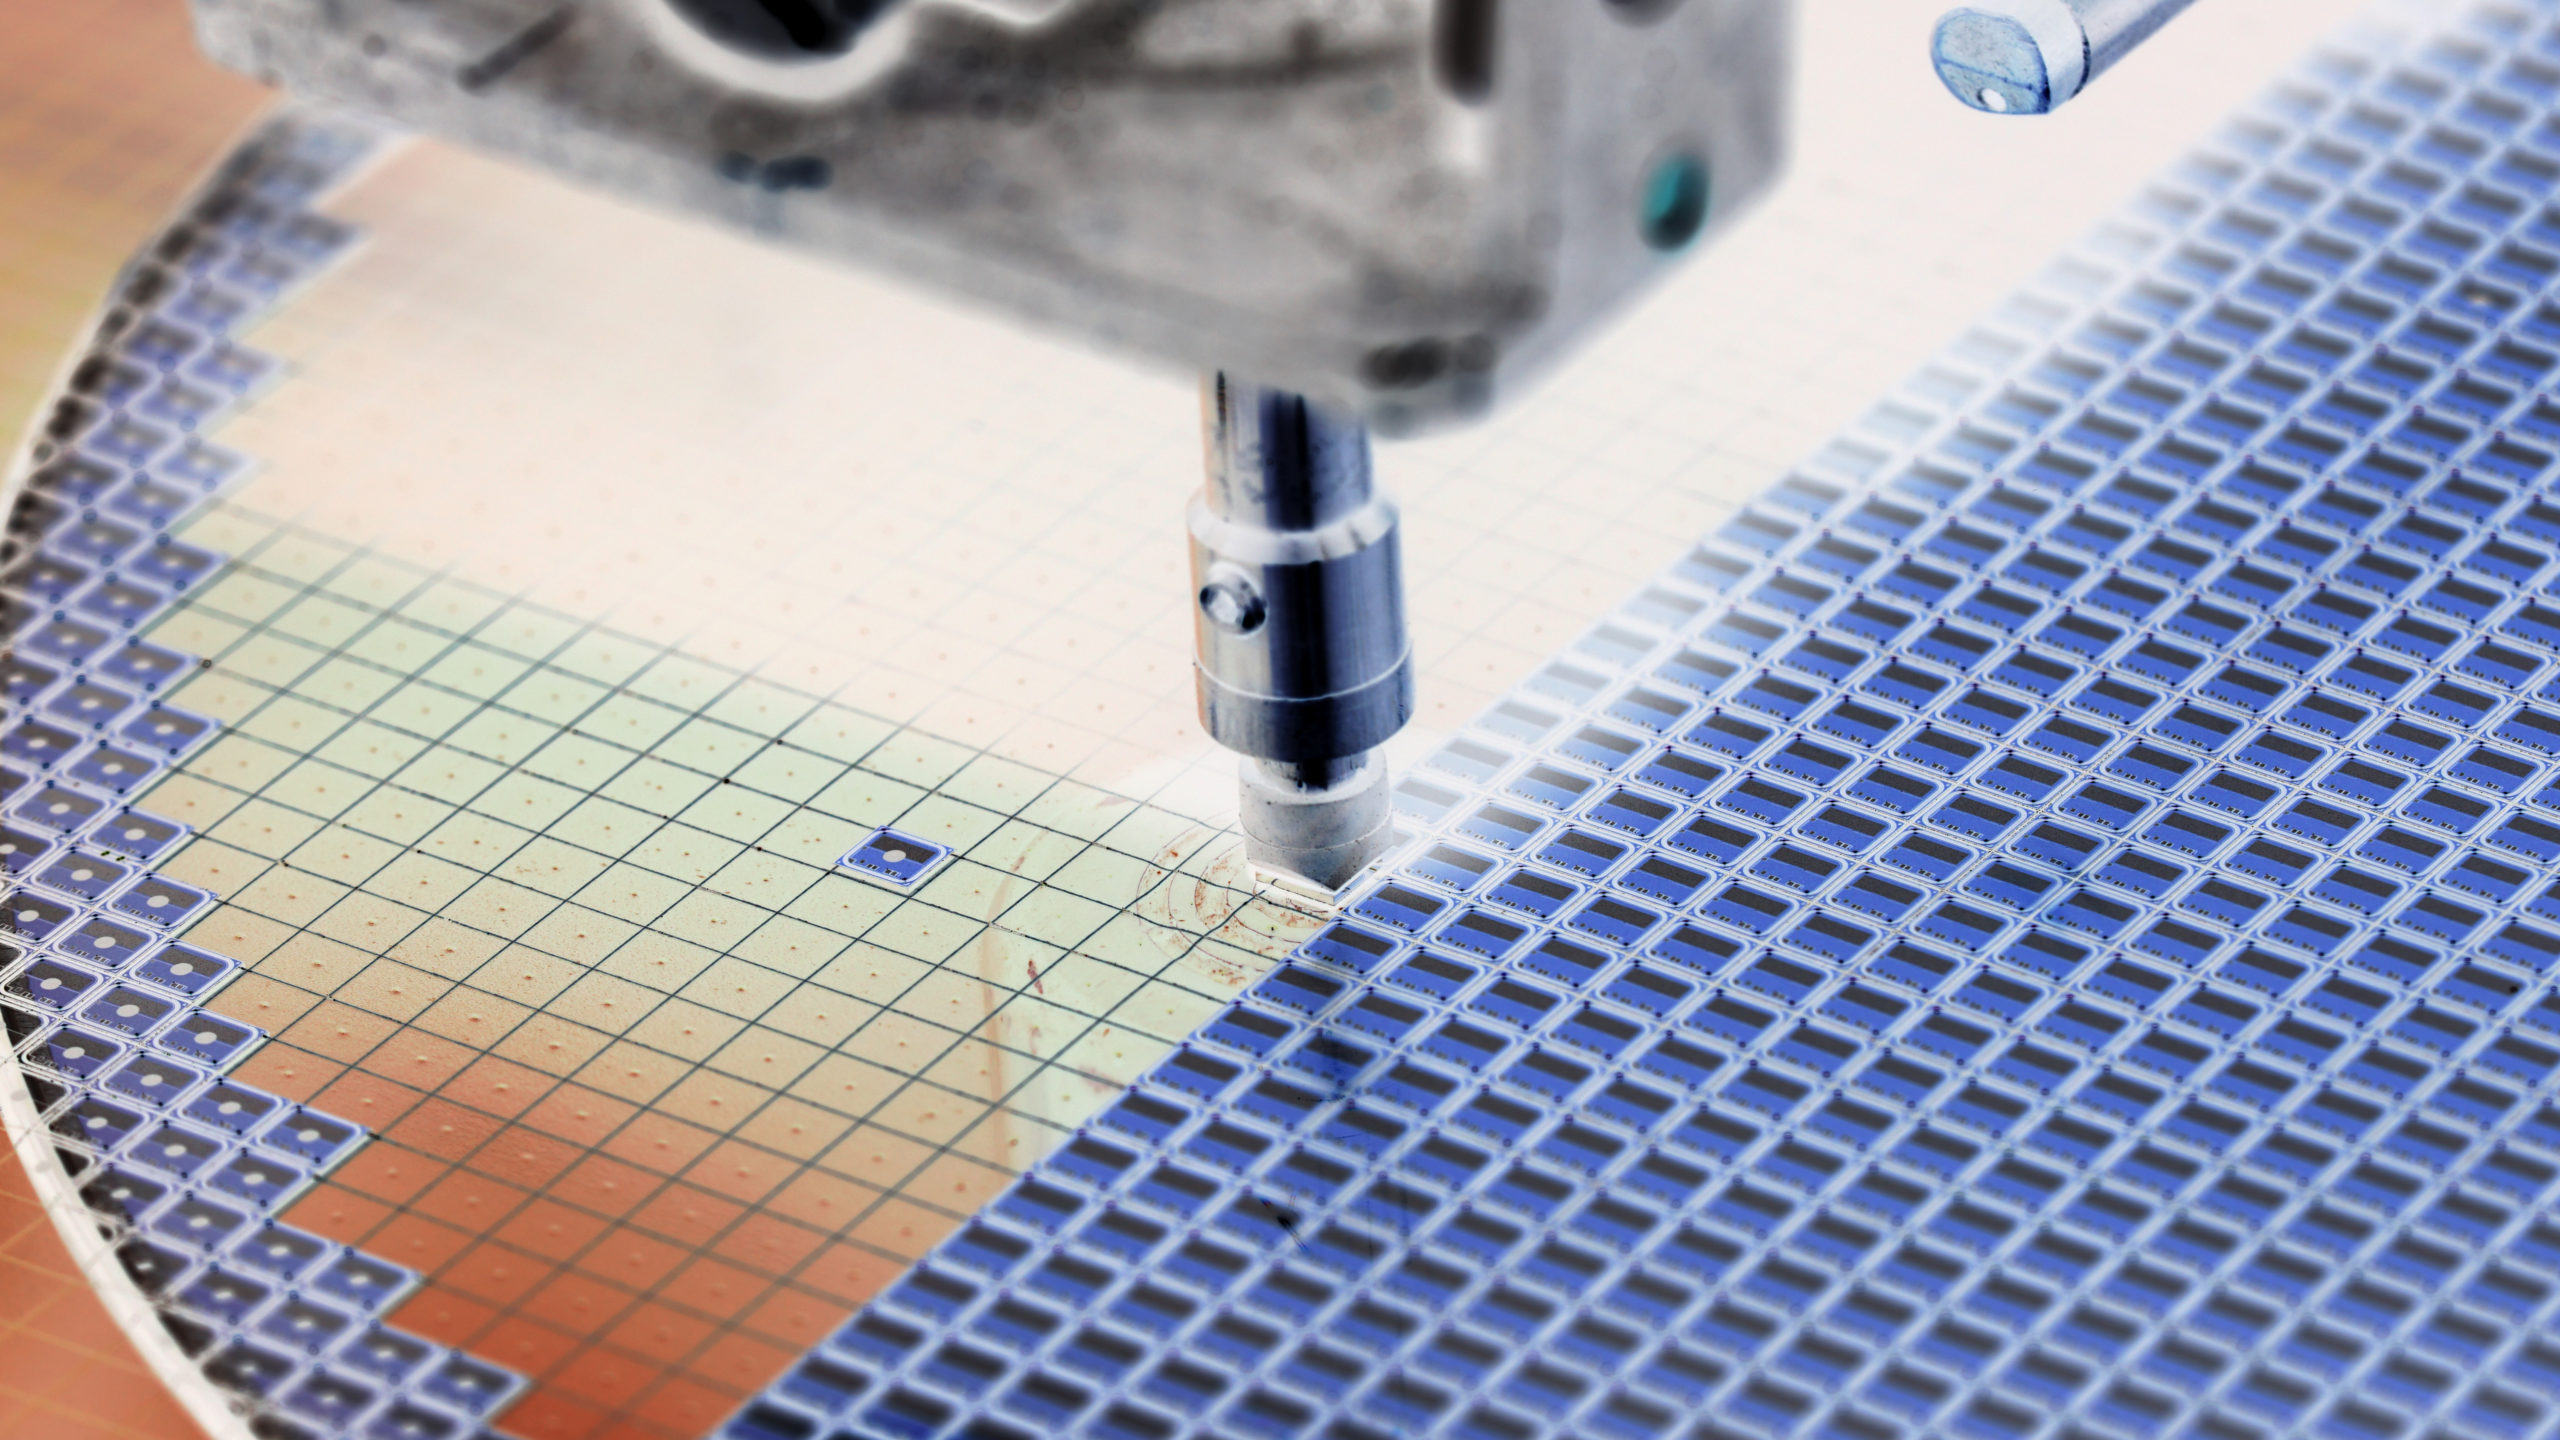  Semiconductor manufacturing process as wafer chips are placed